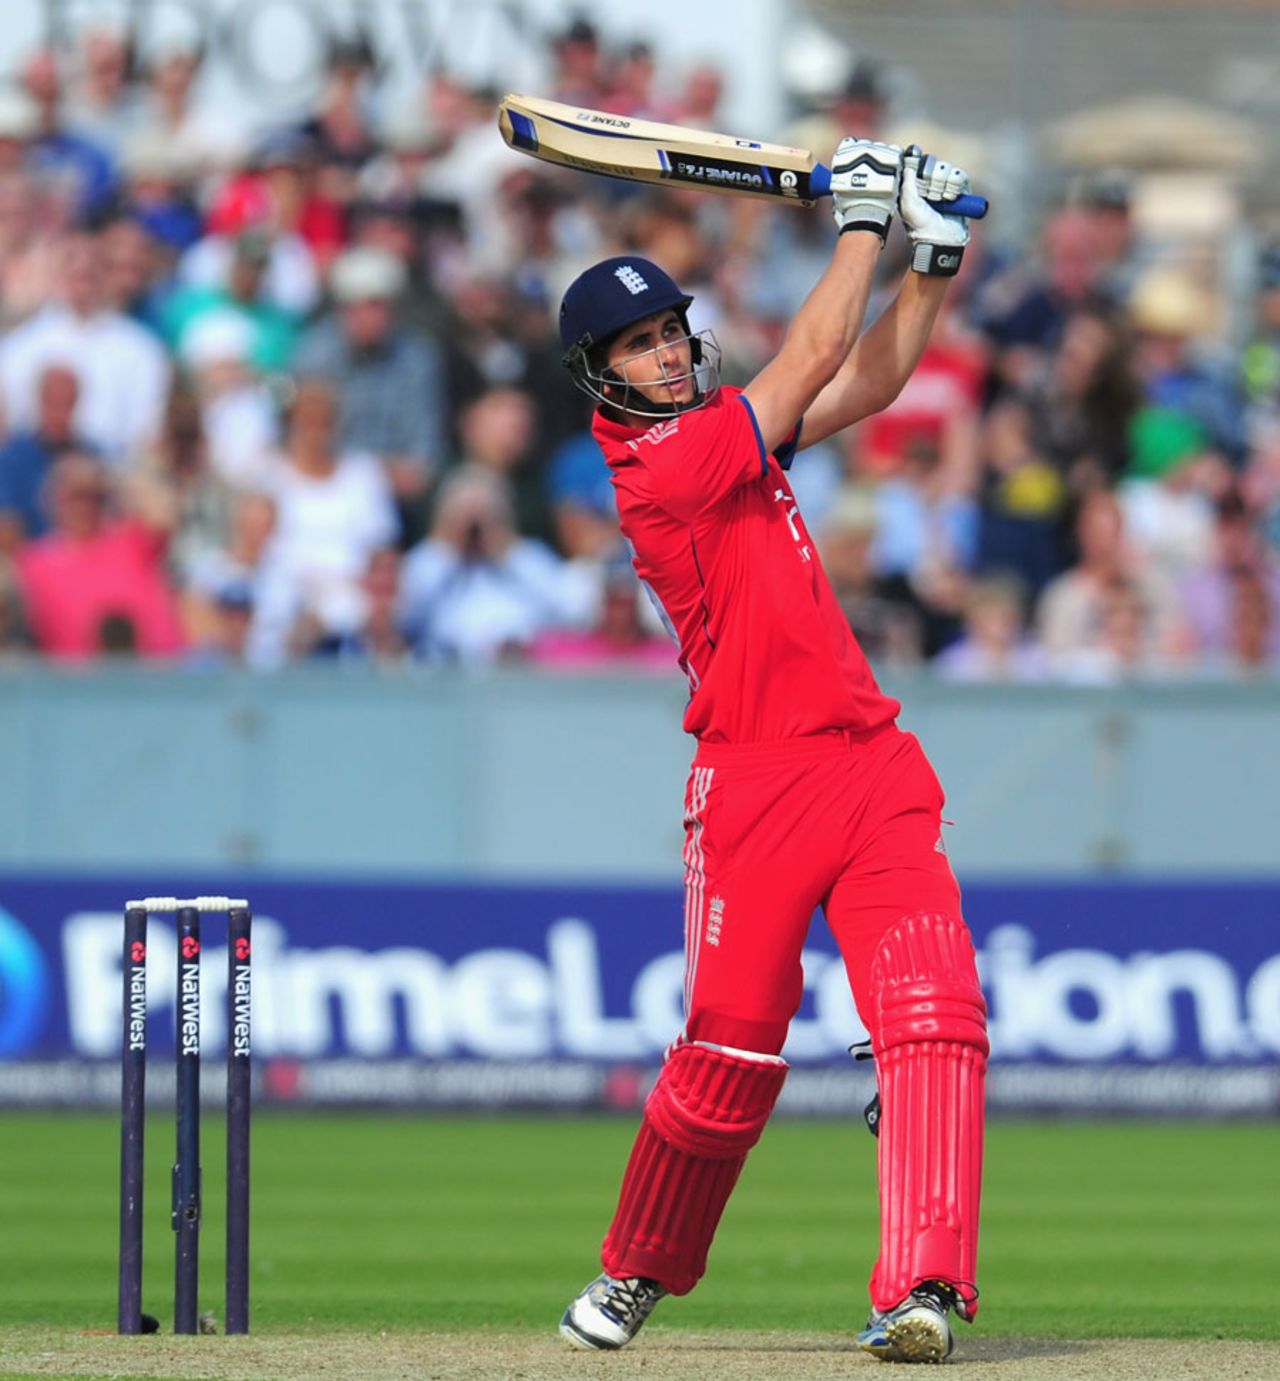 Alex Hales hits down the ground, England v Australia, 2nd T20, Chester-le-Street, August 31, 2013